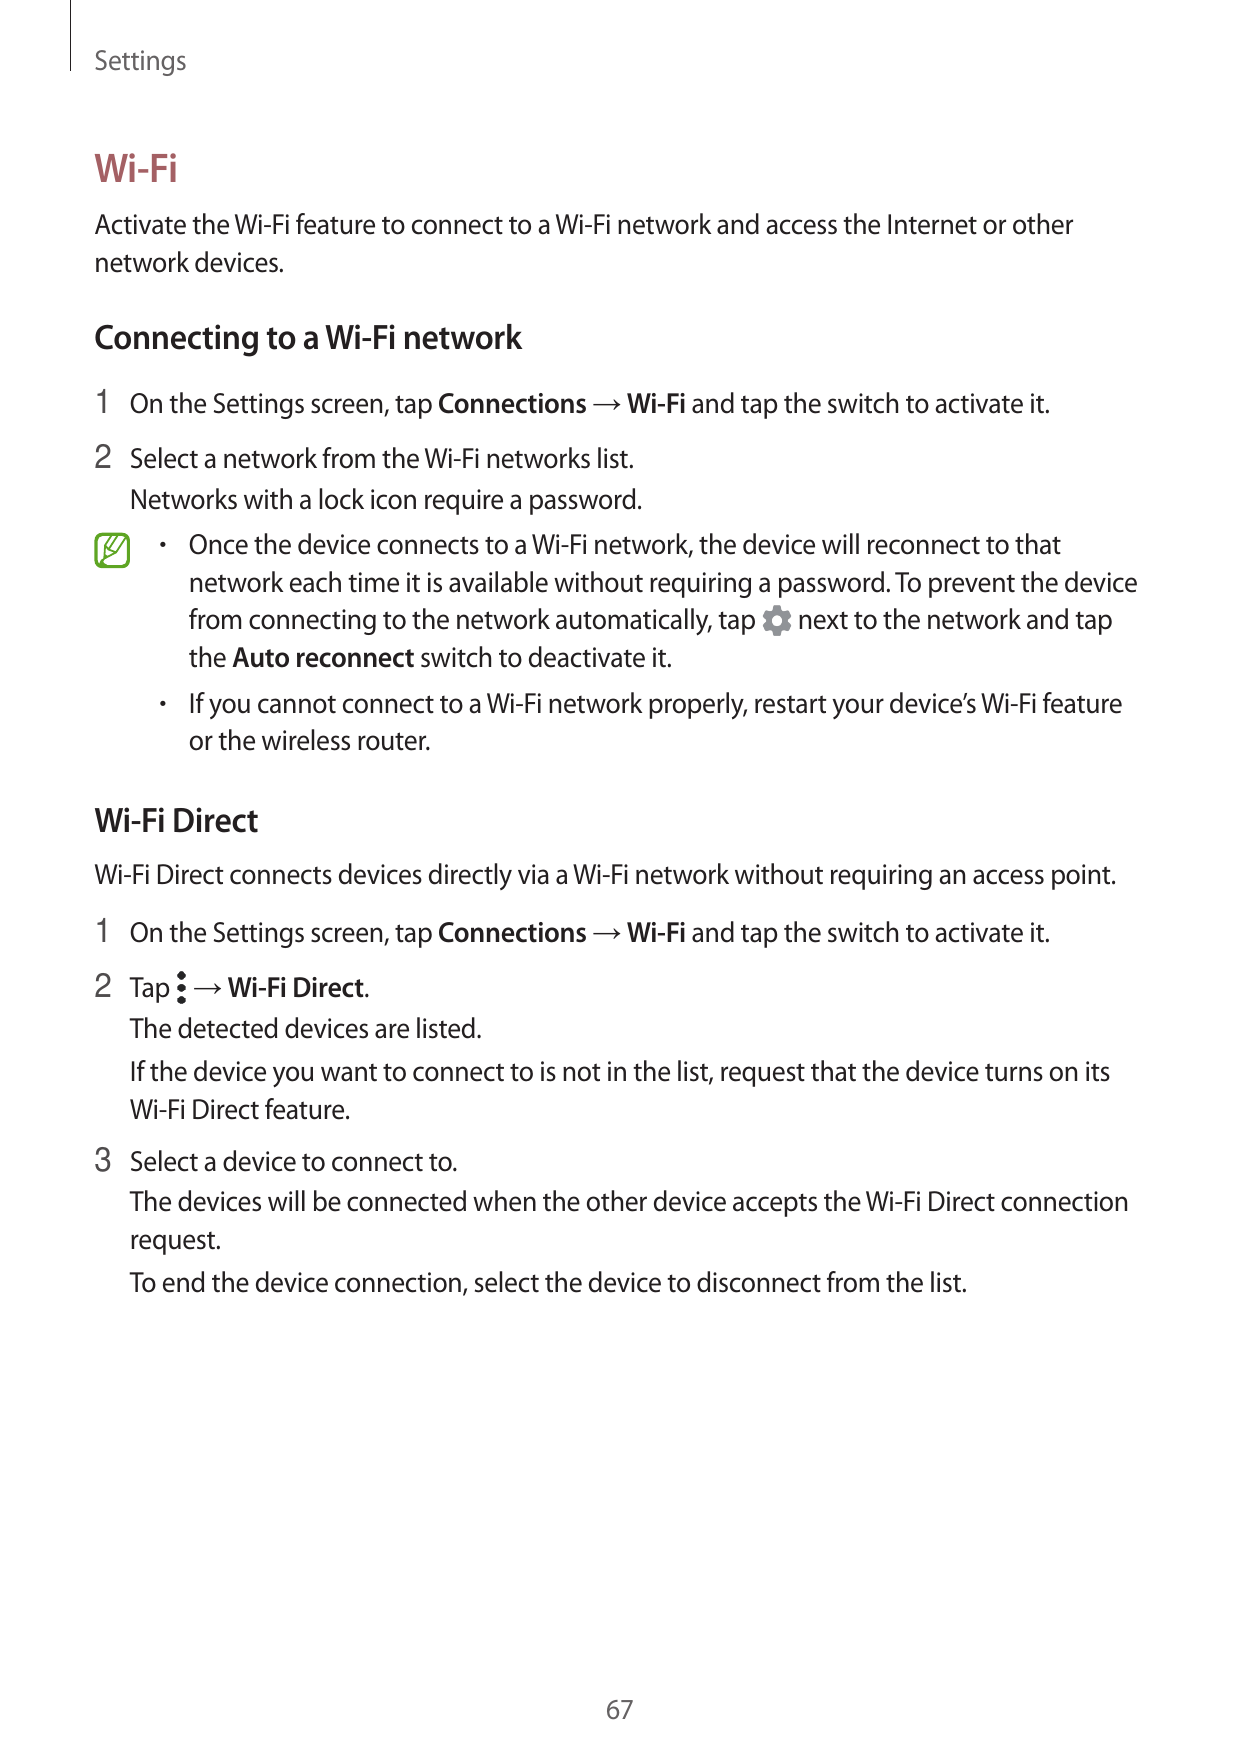 SettingsWi-FiActivate the Wi-Fi feature to connect to a Wi-Fi network and access the Internet or othernetwork devices.Connecting